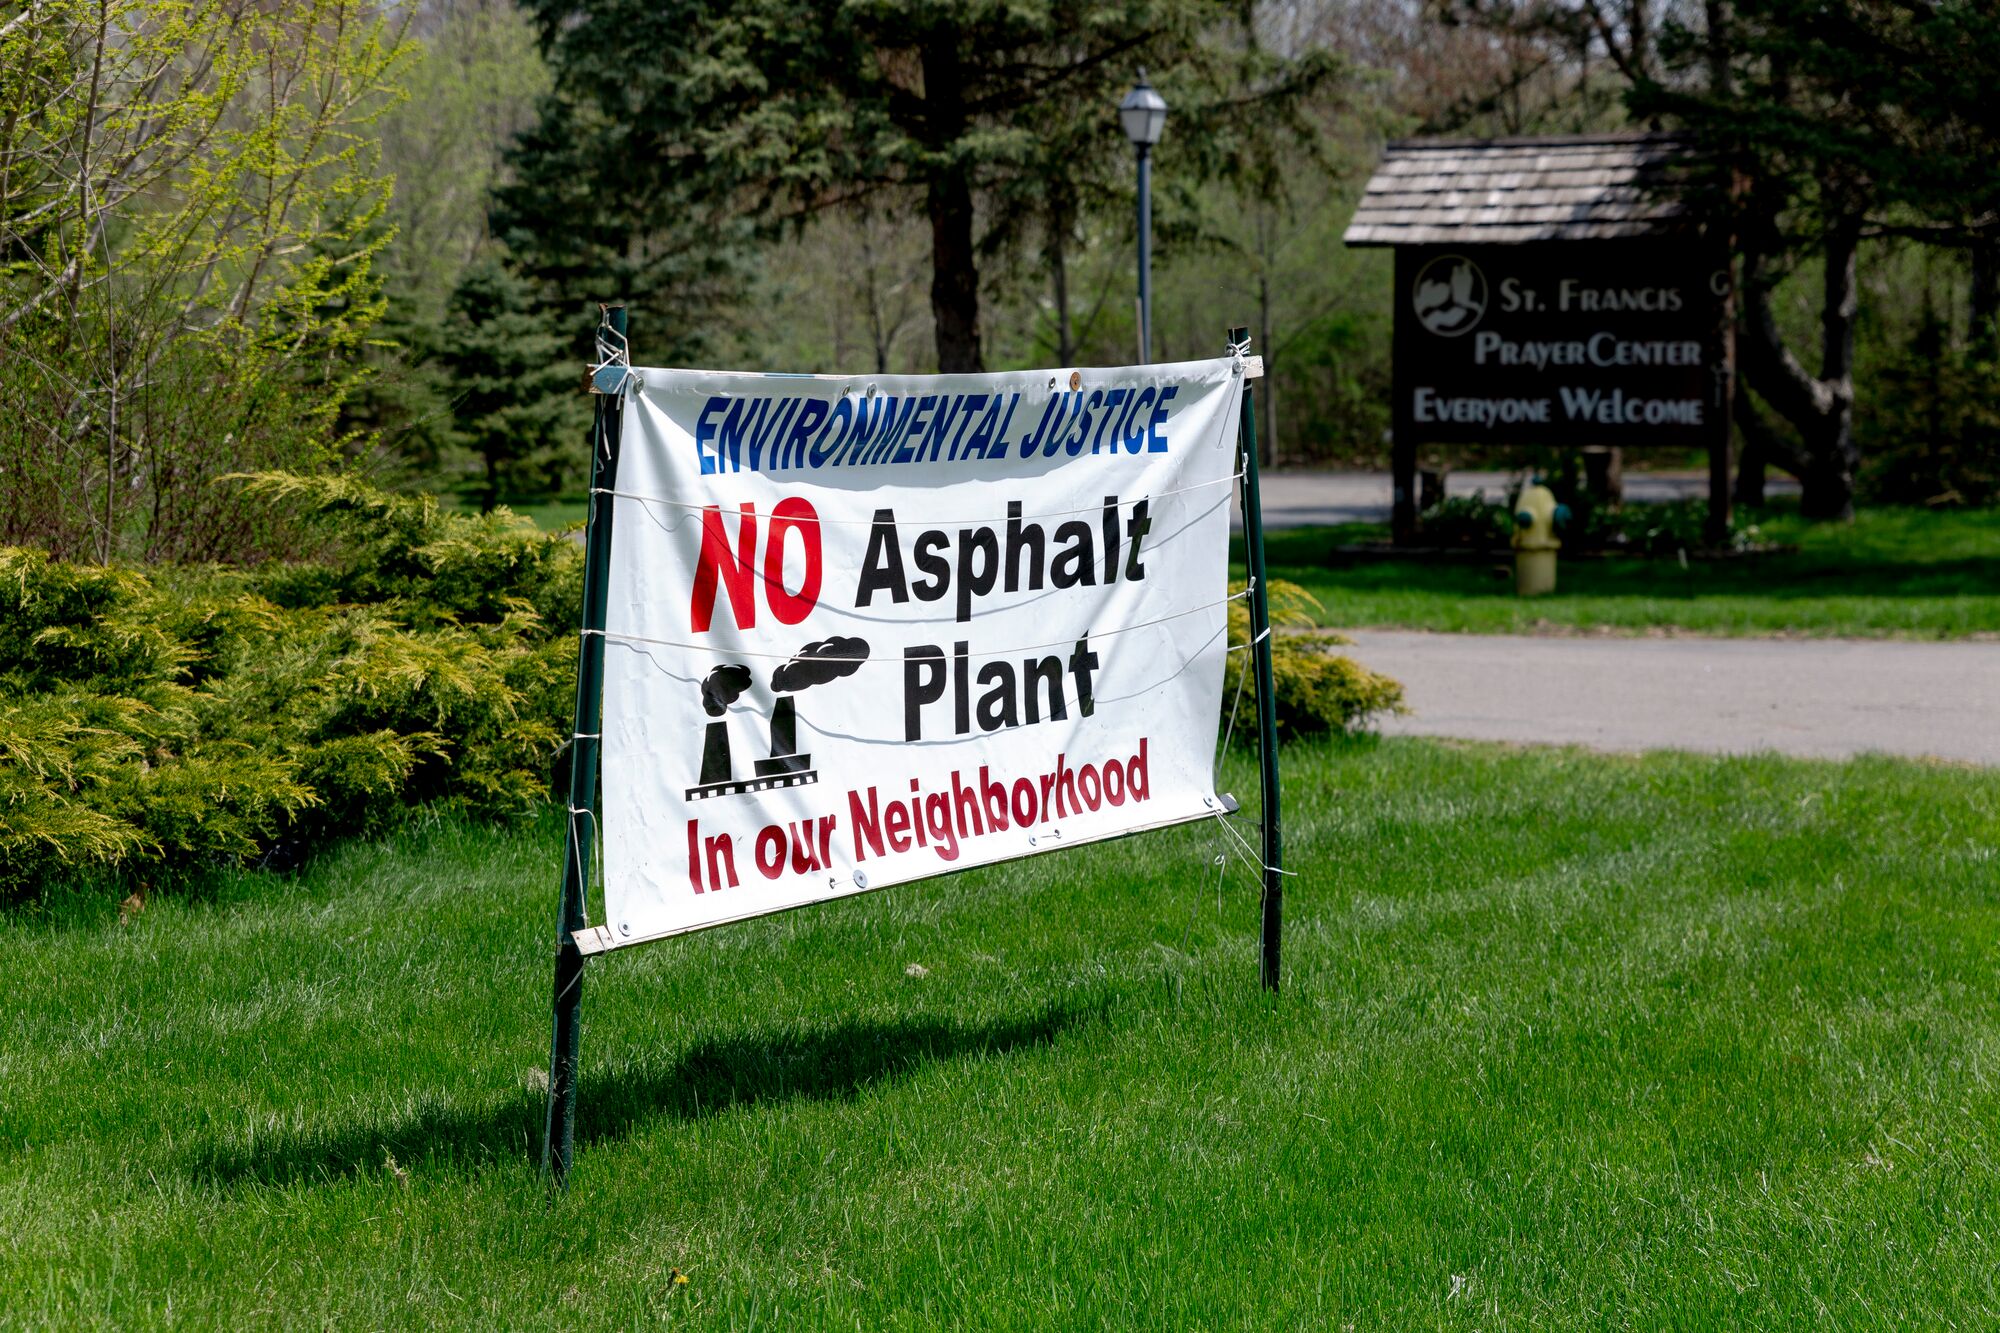 A sign protesting the asphalt plant is seen outside of St. Francis Prayer Center on May 10, 2022 in Flint, Michigan.